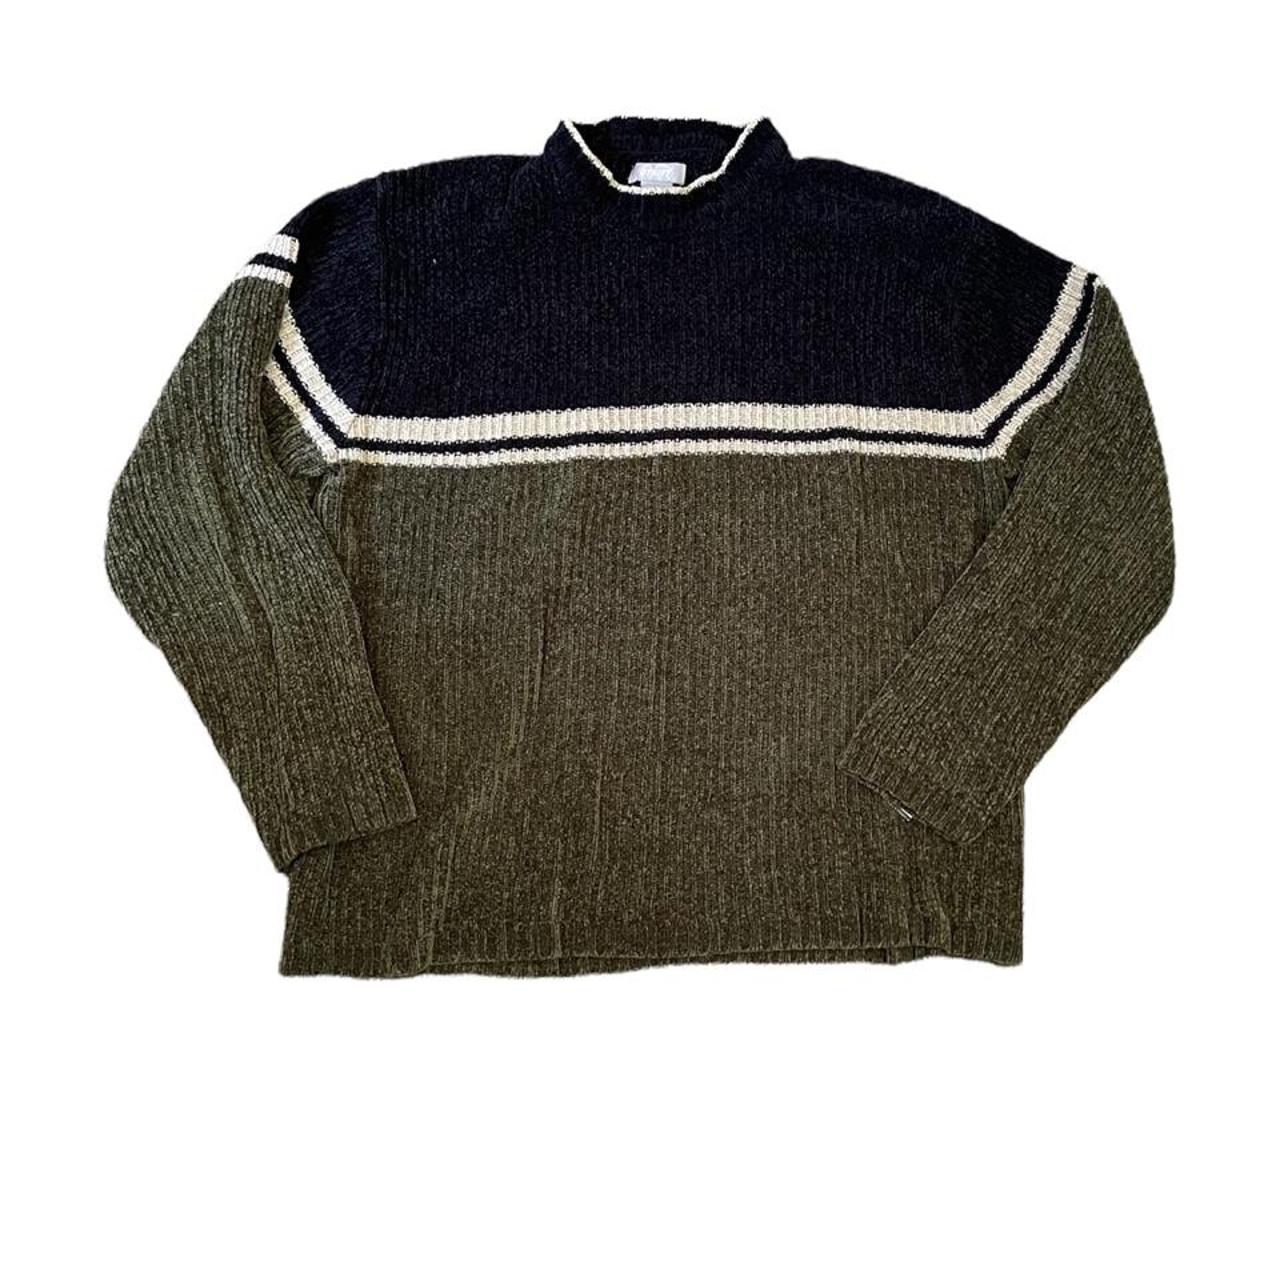 Product Image 1 - Knitted Crew Neck

Grandpa Sweater

Fluffy and